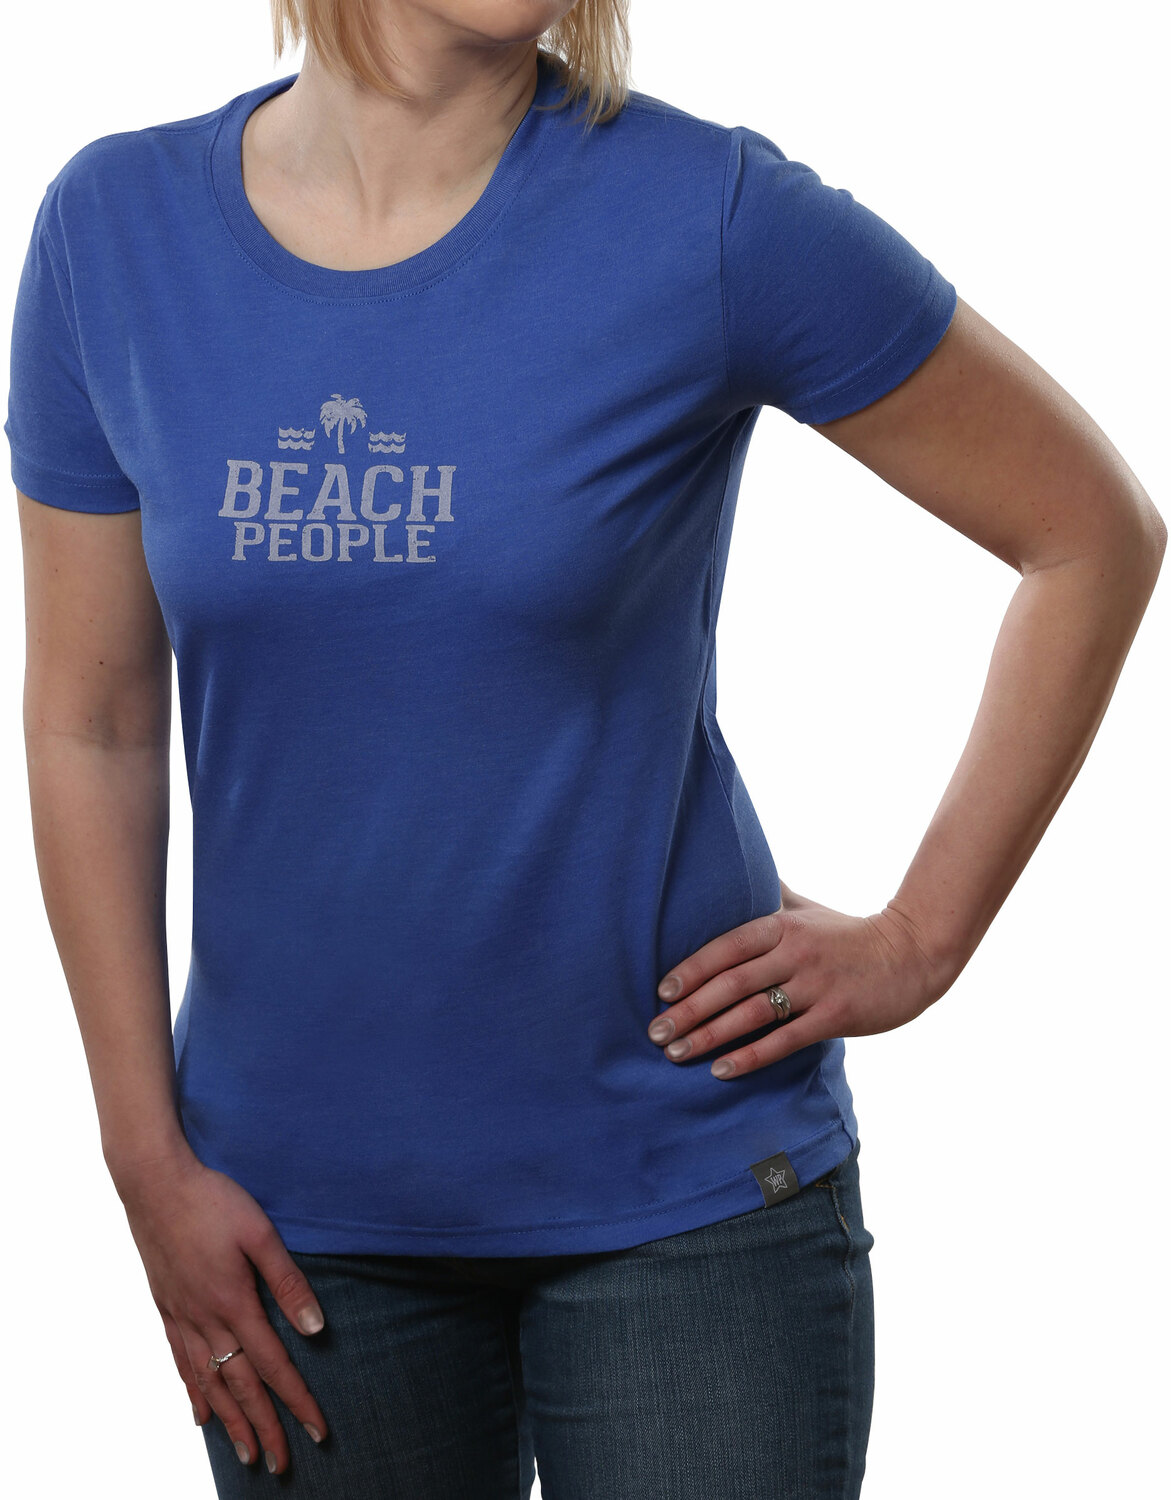 Beach People by We People - Beach People - Double Extra Large Blue Women's T-Shirt